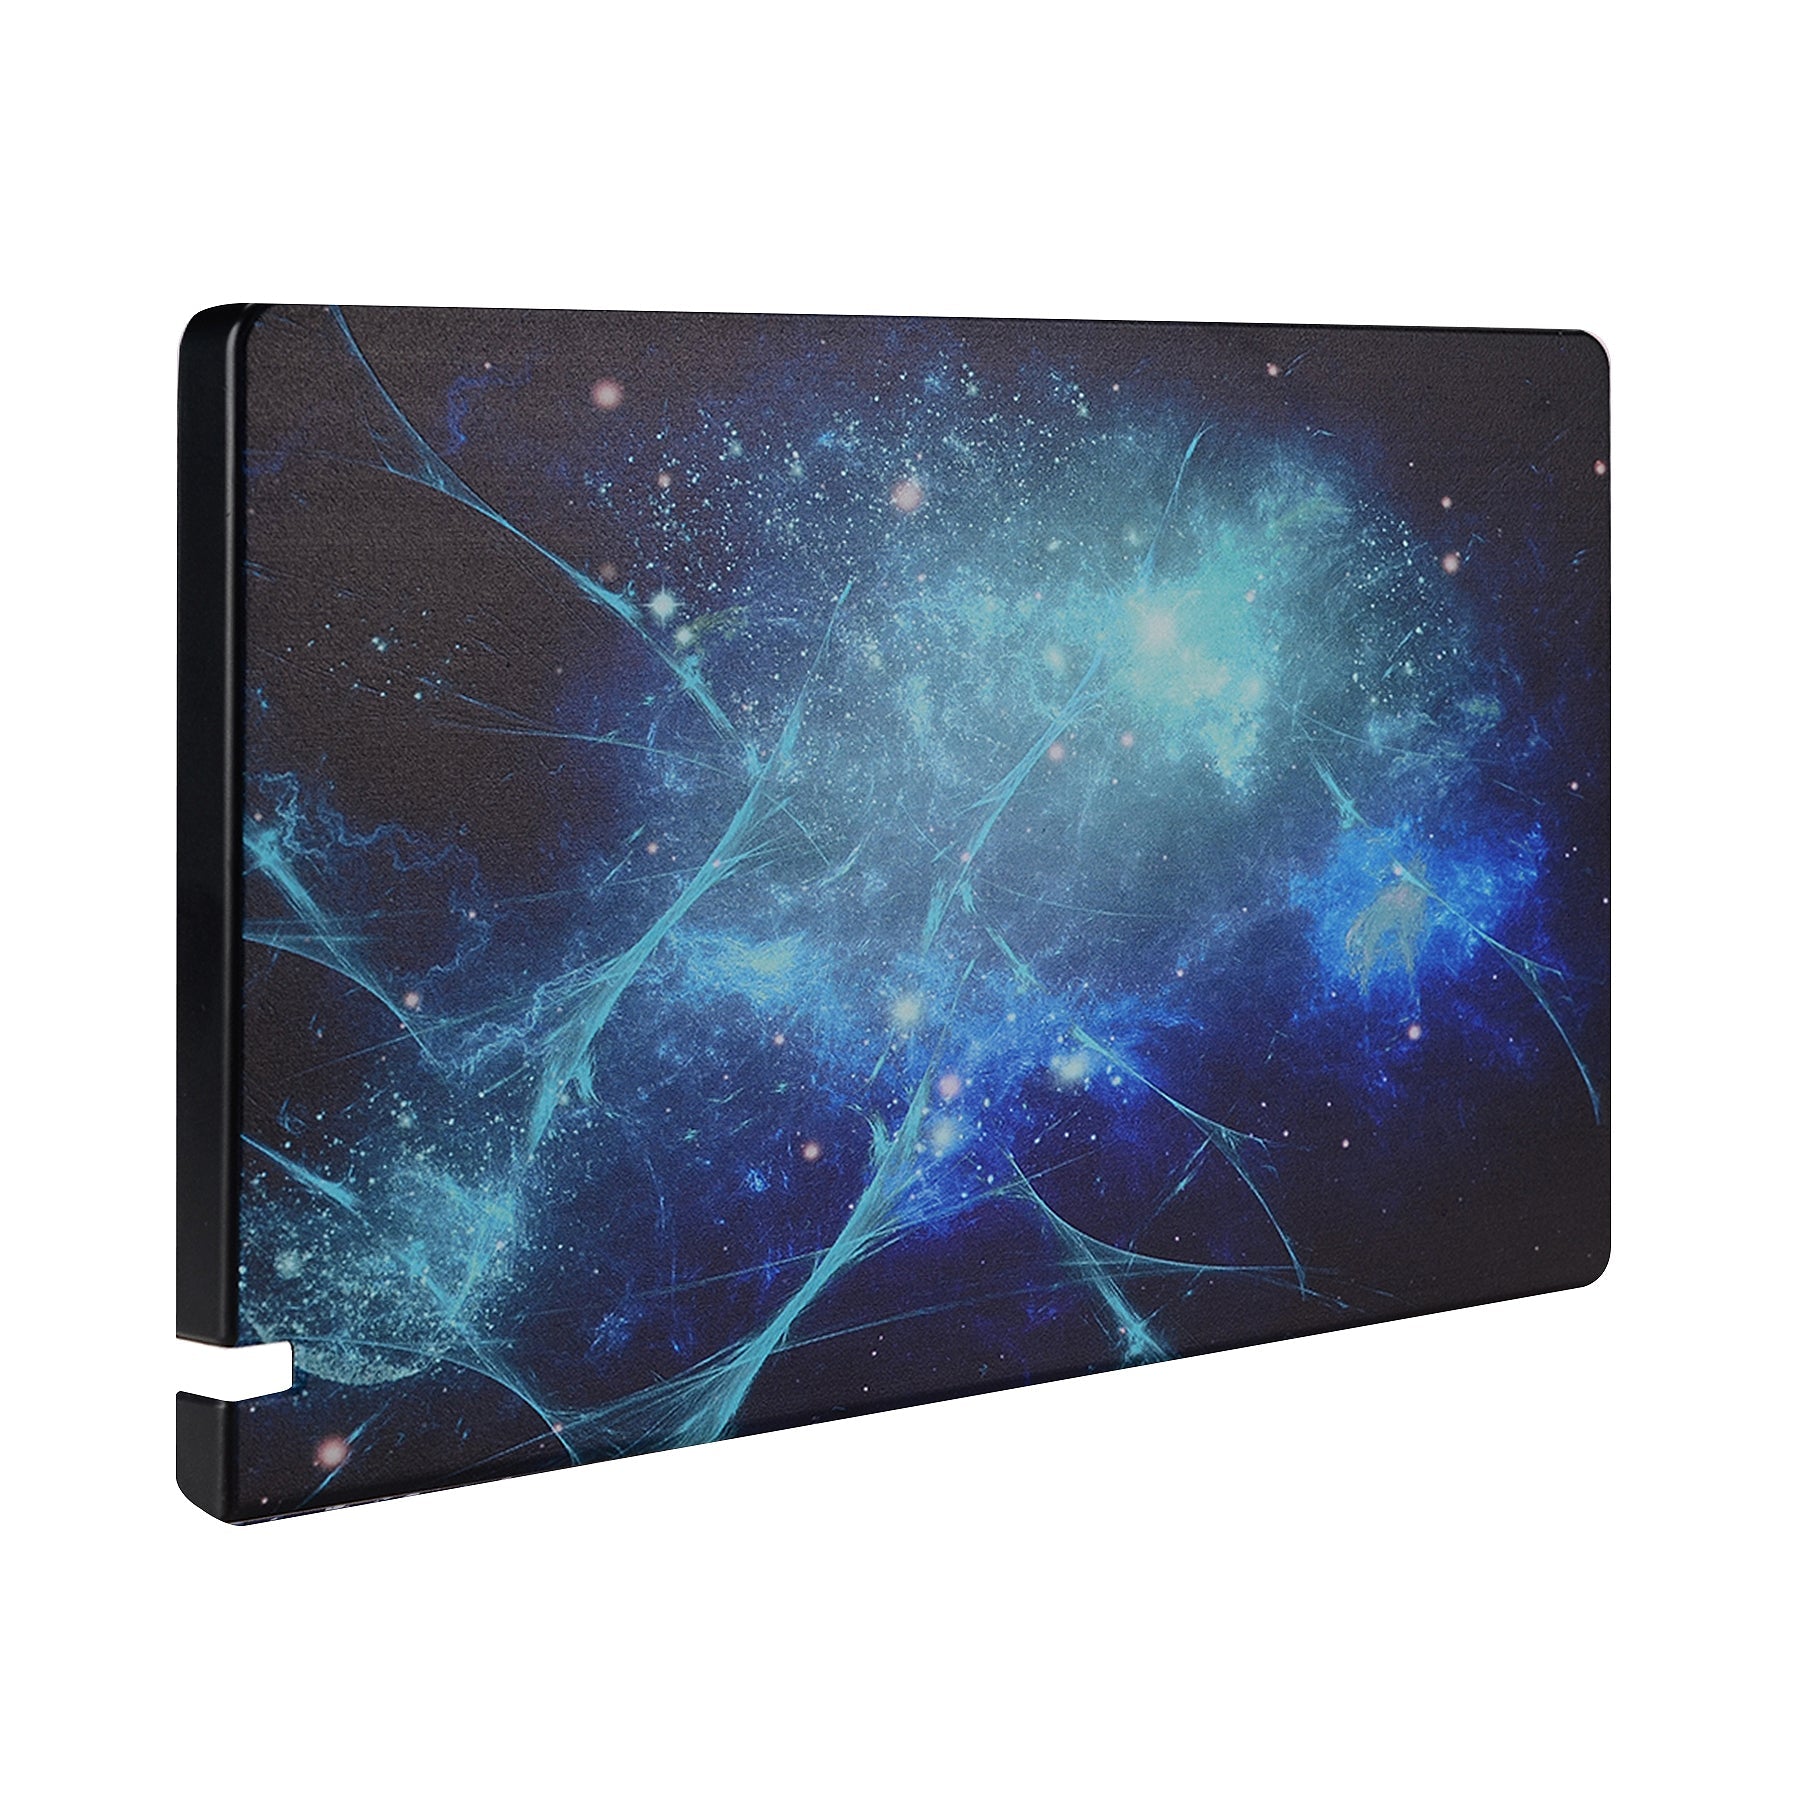 PlayVital Blue Nebula Patterned Custom Protective Case for NS Switch Charging Dock, Dust Anti Scratch Dust Hard Cover for NS Switch Dock - Dock NOT Included - NTG7004 PlayVital